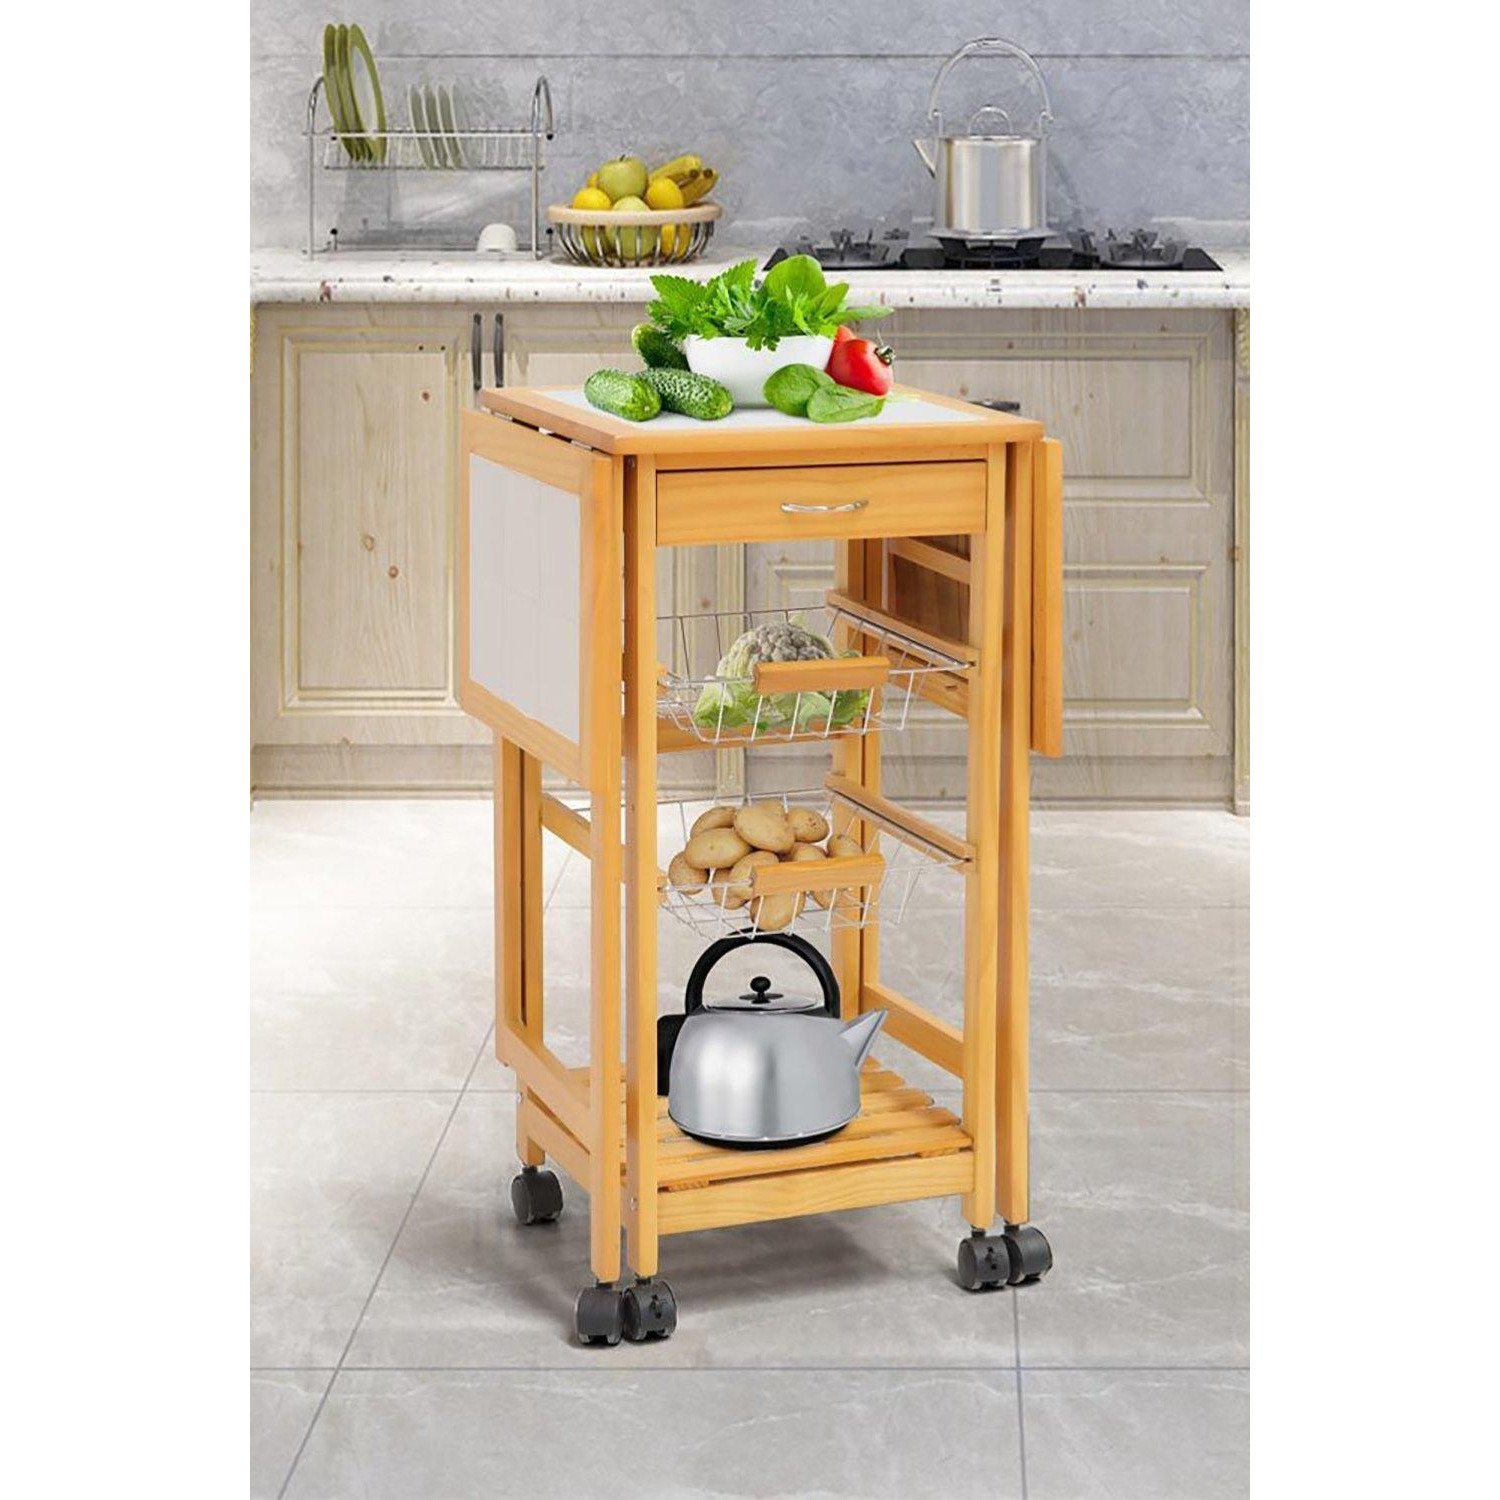 Ceramic Tile Top Pine Kitchen Trolley Foldable Dining Table - image 1